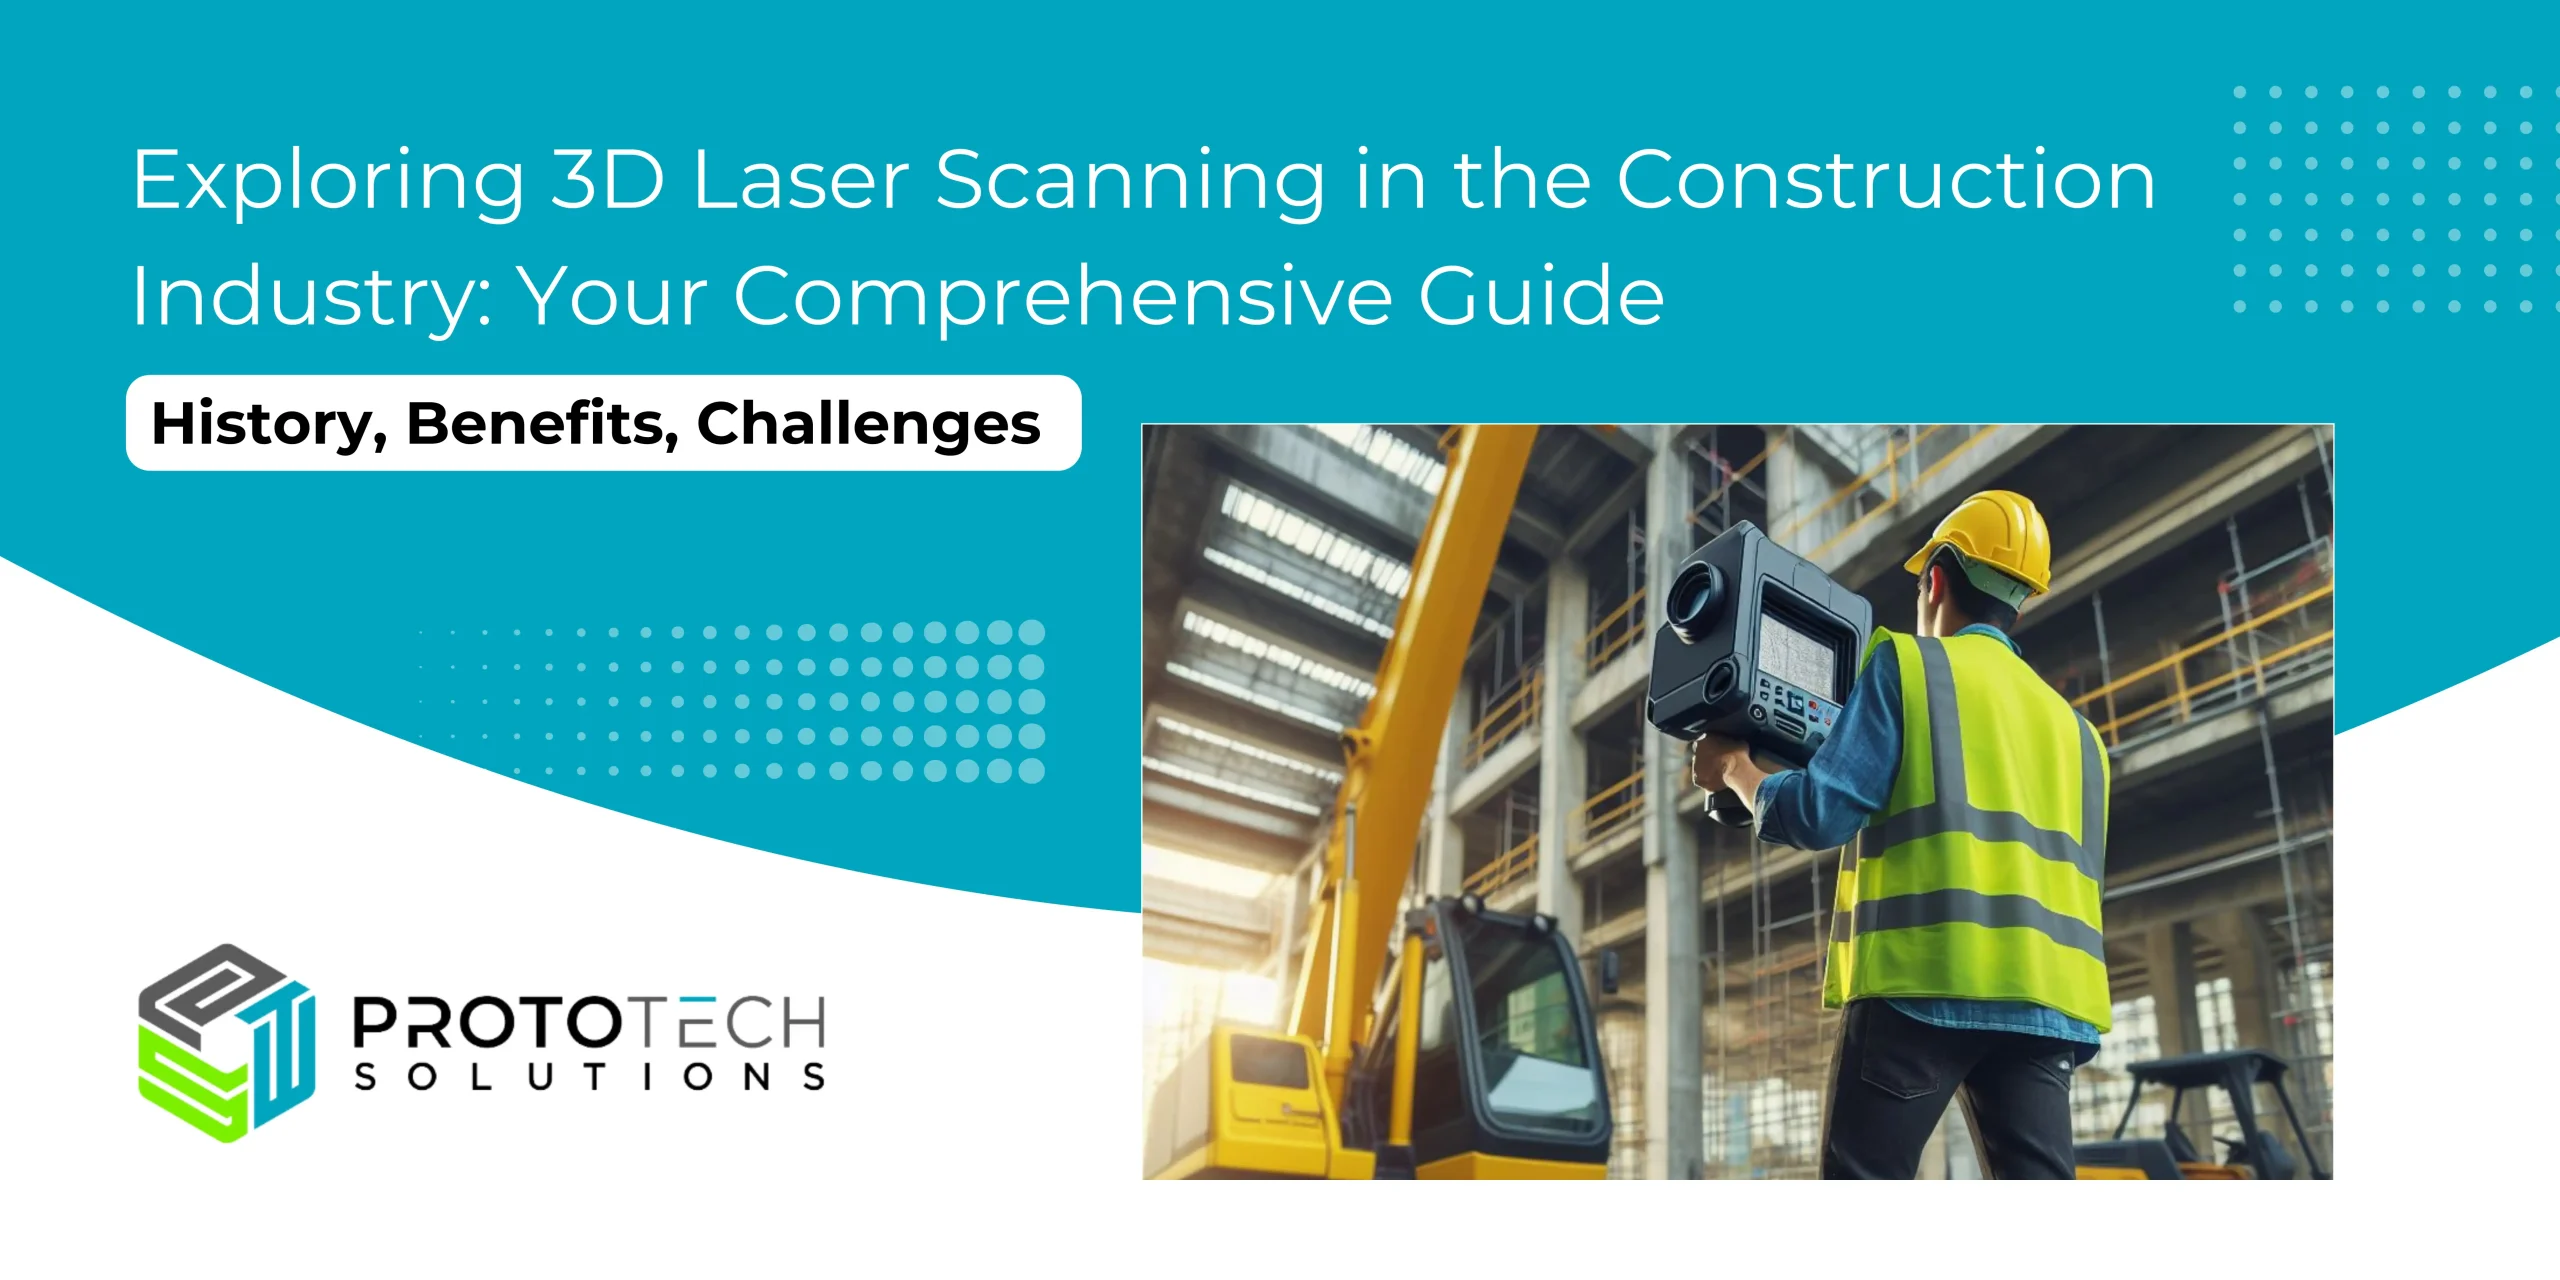 Exploring 3D Laser Scanning in the Construction Industry: Your Comprehensive Guide